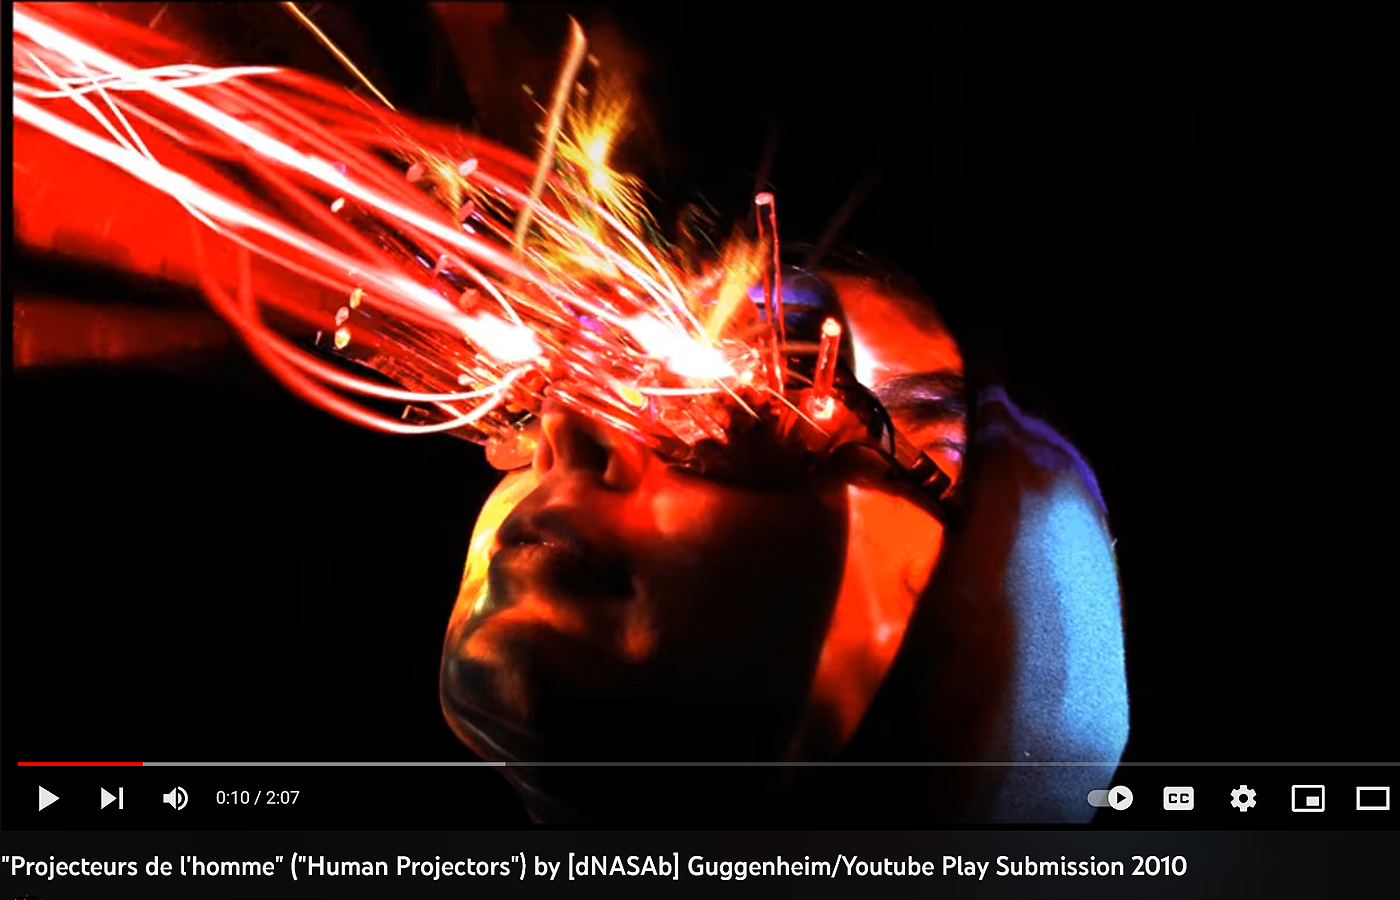 "Projecteurs de l'homme" ("Human Projectors") by [dNASAb] Guggenheim/Youtube Play Submission 2010